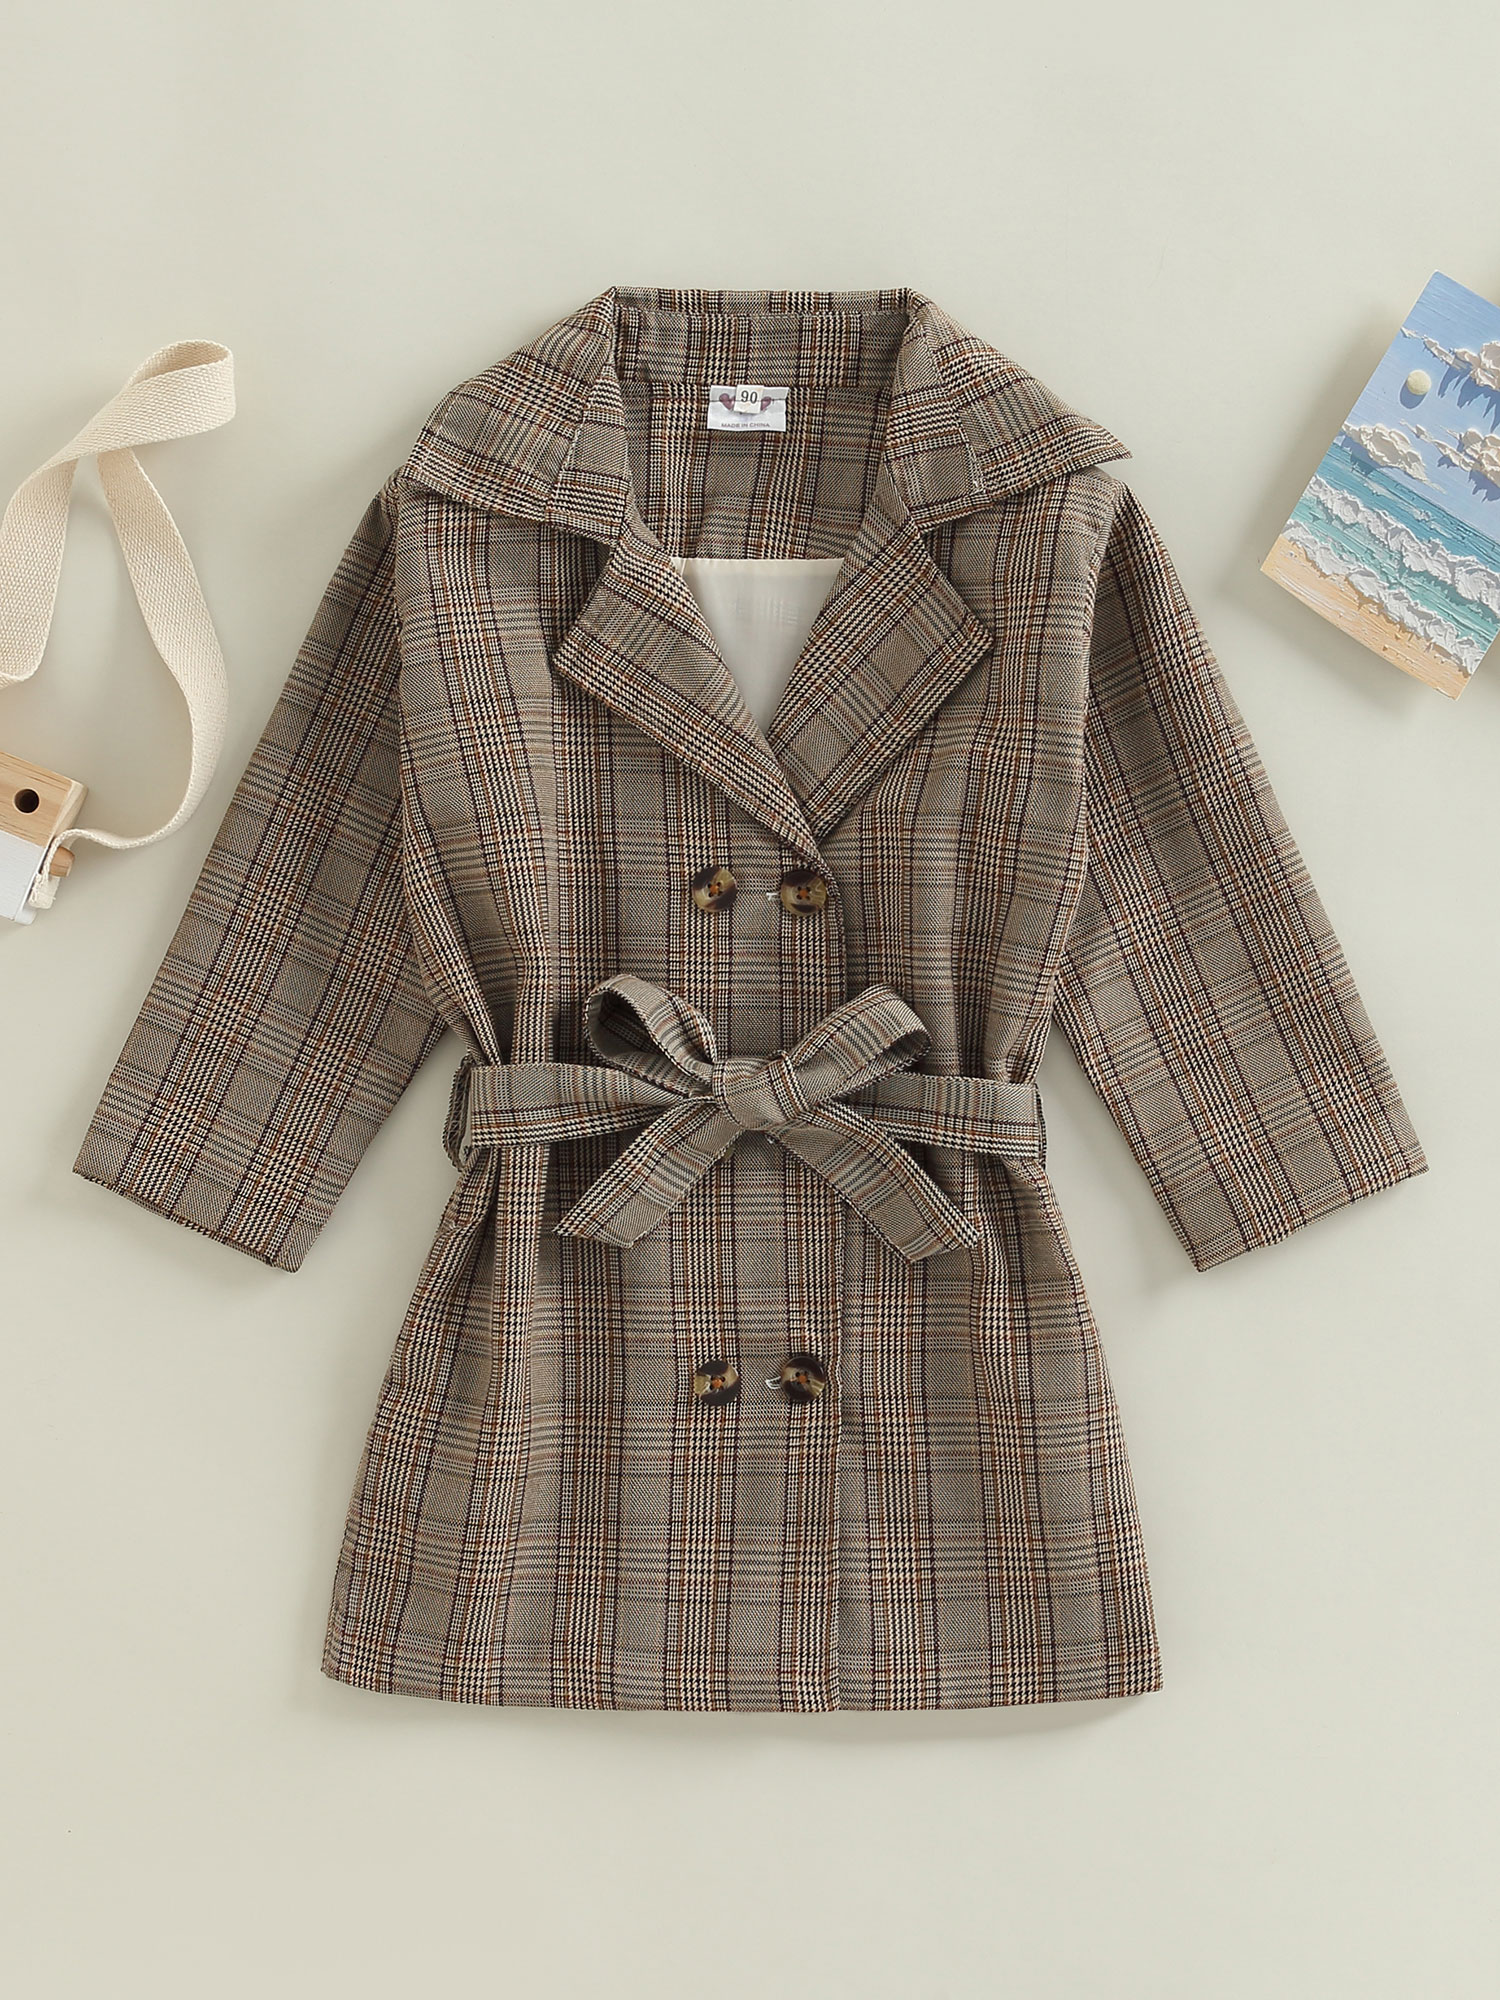 JYYYBF Toddler Baby Girl Trench Coat Long Sleeve Plaid Print Double-Breasted Belted Jacket Lapel Windbreaker Outerwear Grey 3-4 Years - image 3 of 7